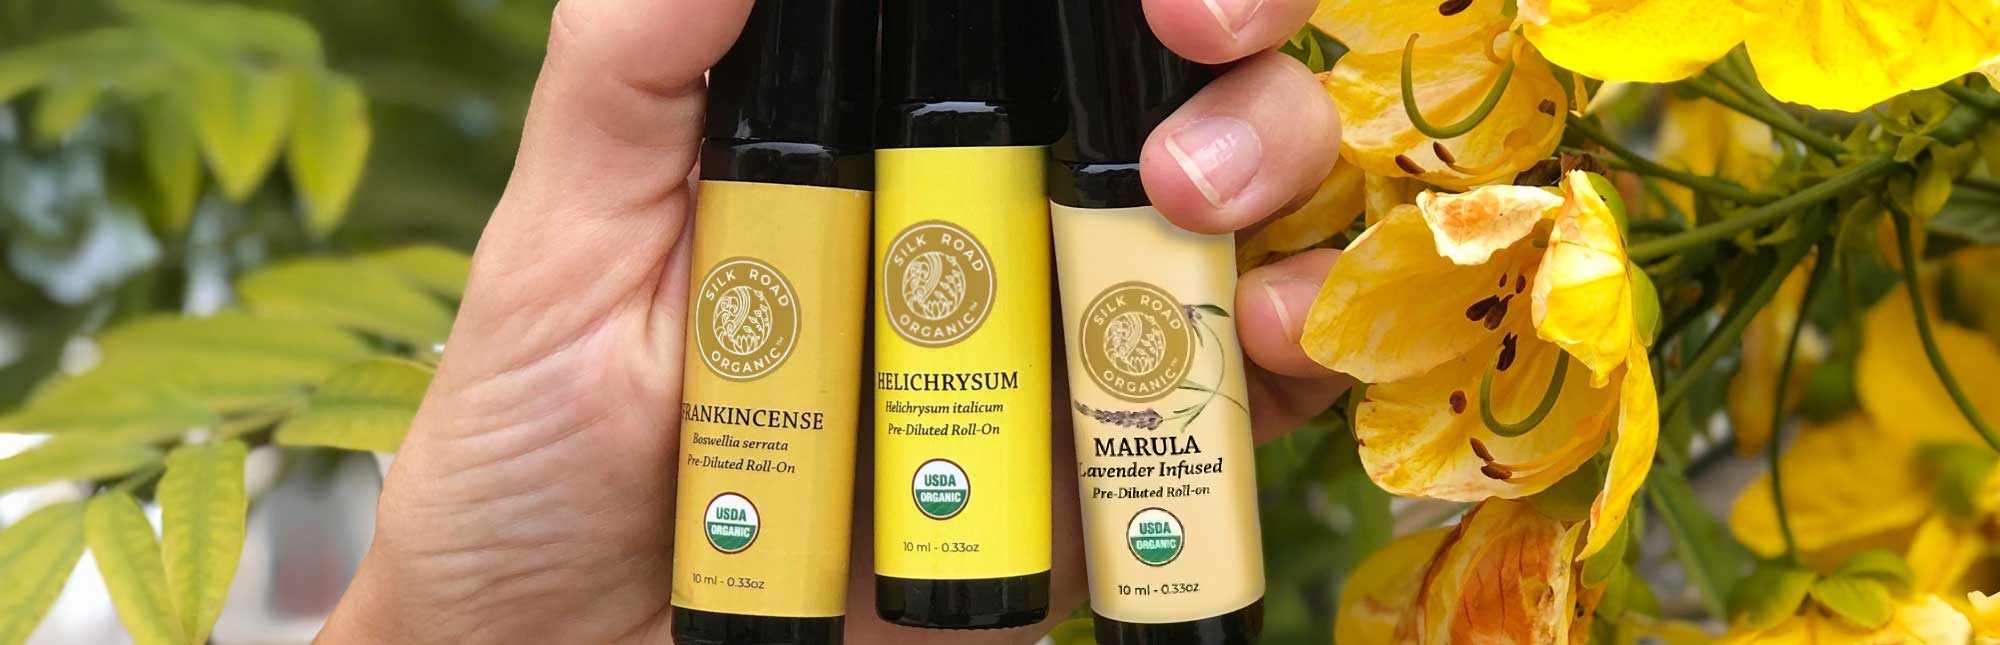 best organic essential oil roll on natural skin care cosmetic frankincense helichrysum marula